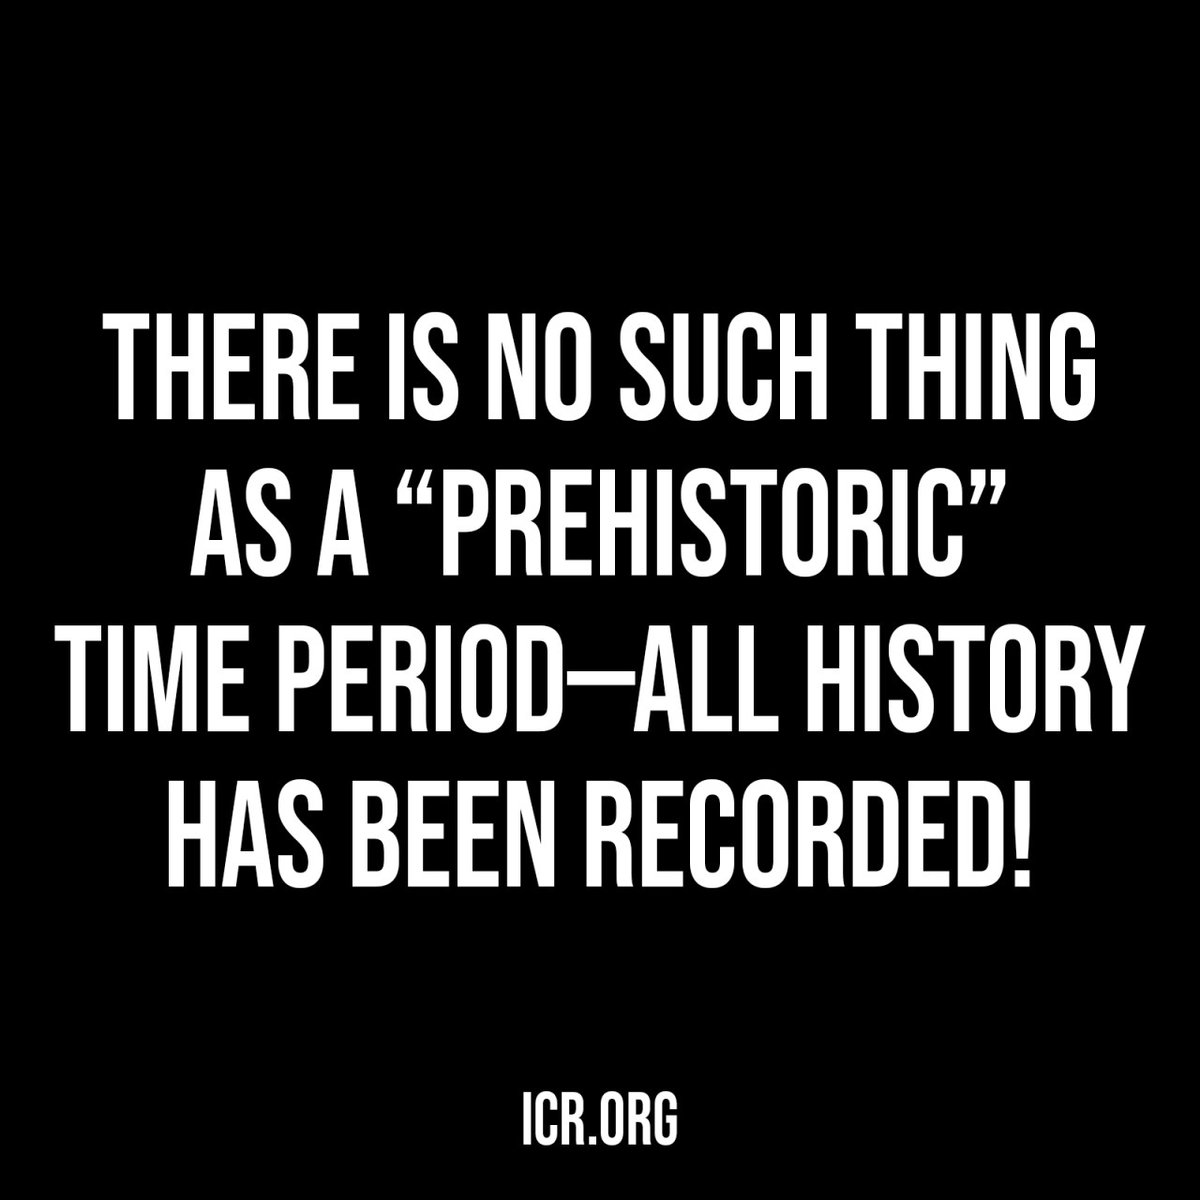 ⌛ Since the history in Genesis 1 goes back to the very beginning of the universe, there is no such thing as a 'prehistoric' time period—all history has been recorded! #IceAge #History